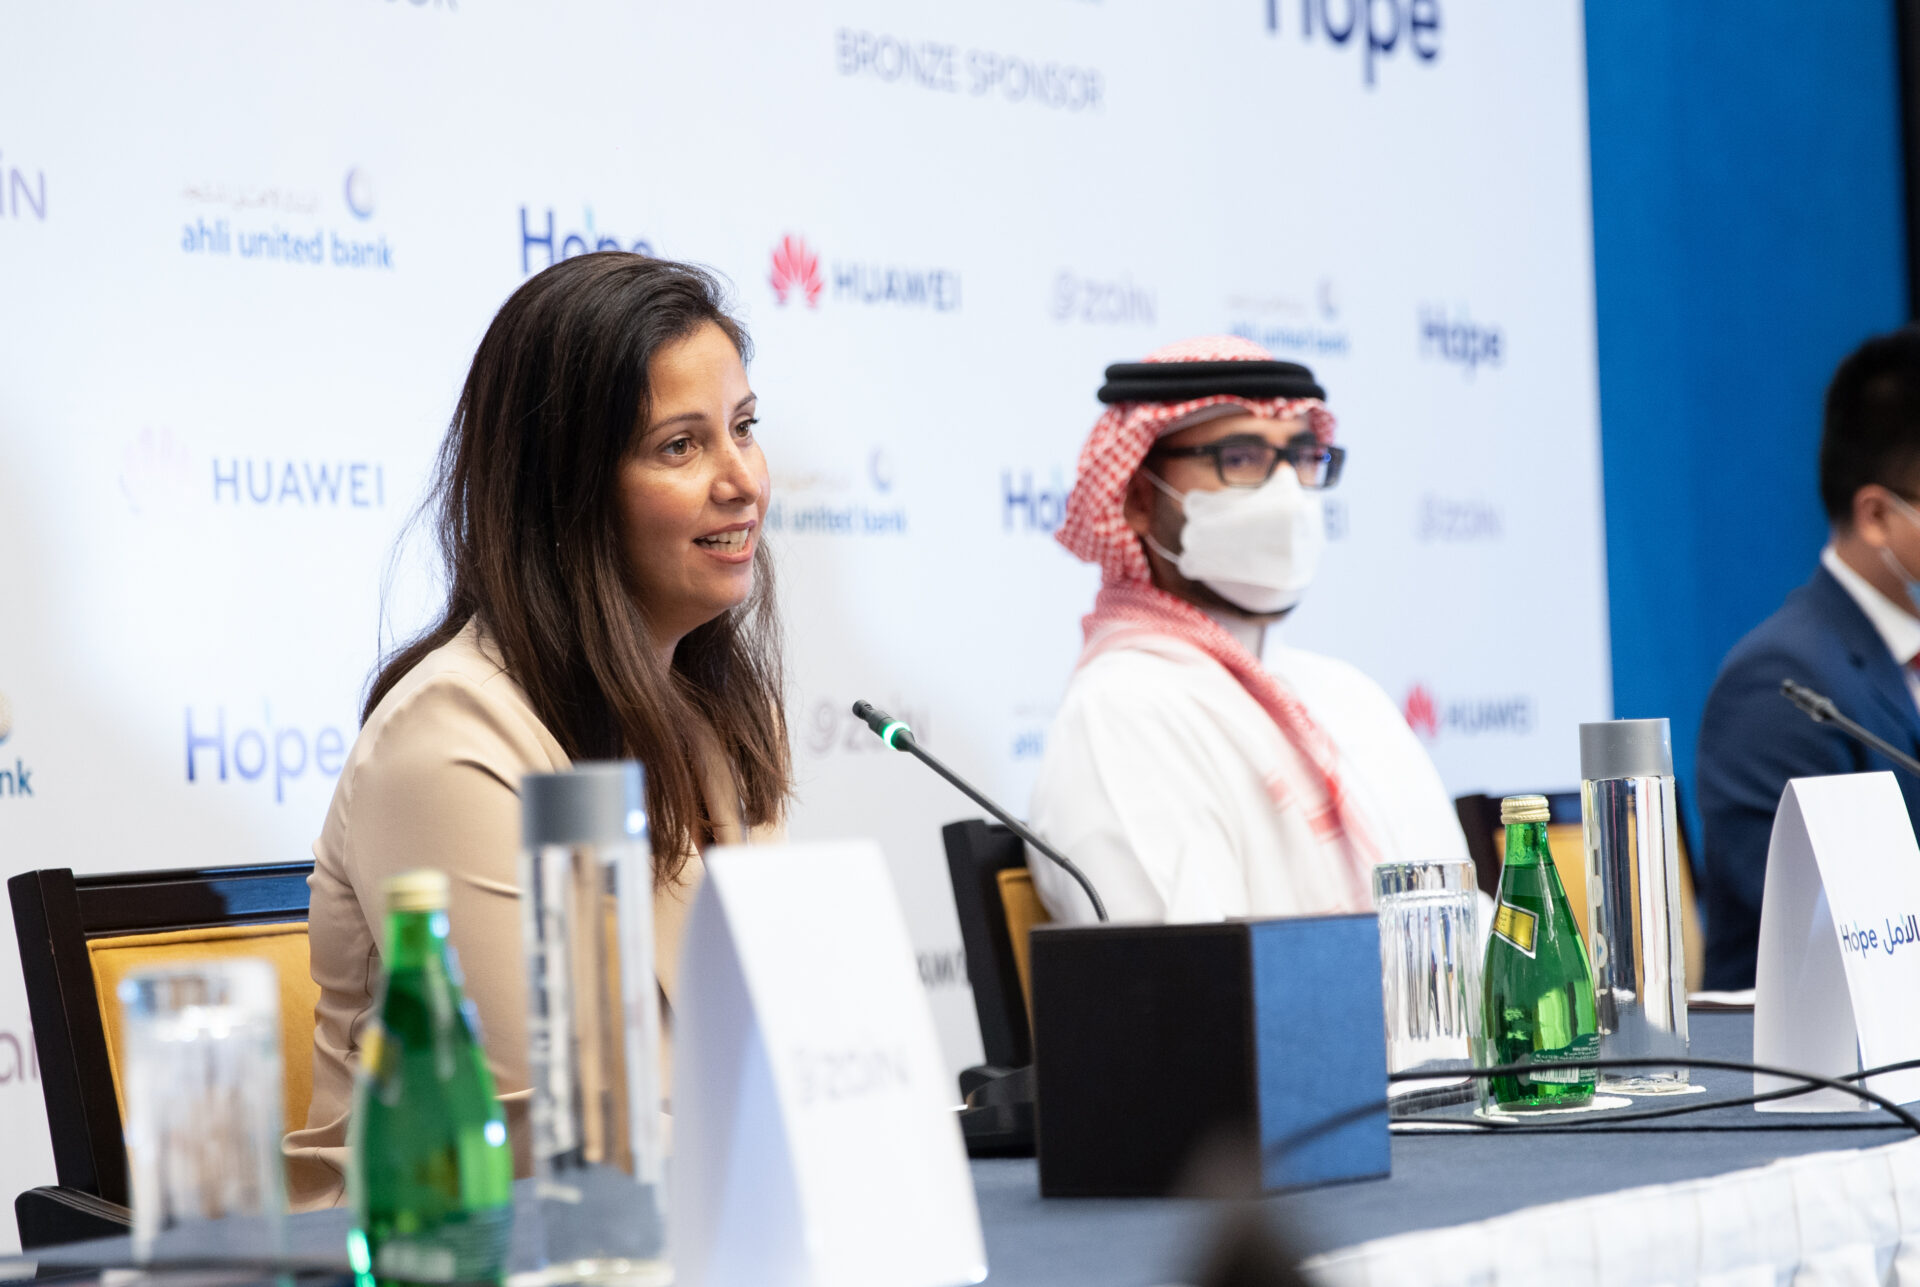 Featured image for “Hope Ventures establishes strategic partnerships with ‘Biban’ sponsors and selects 12 high-potential businesses for the show”